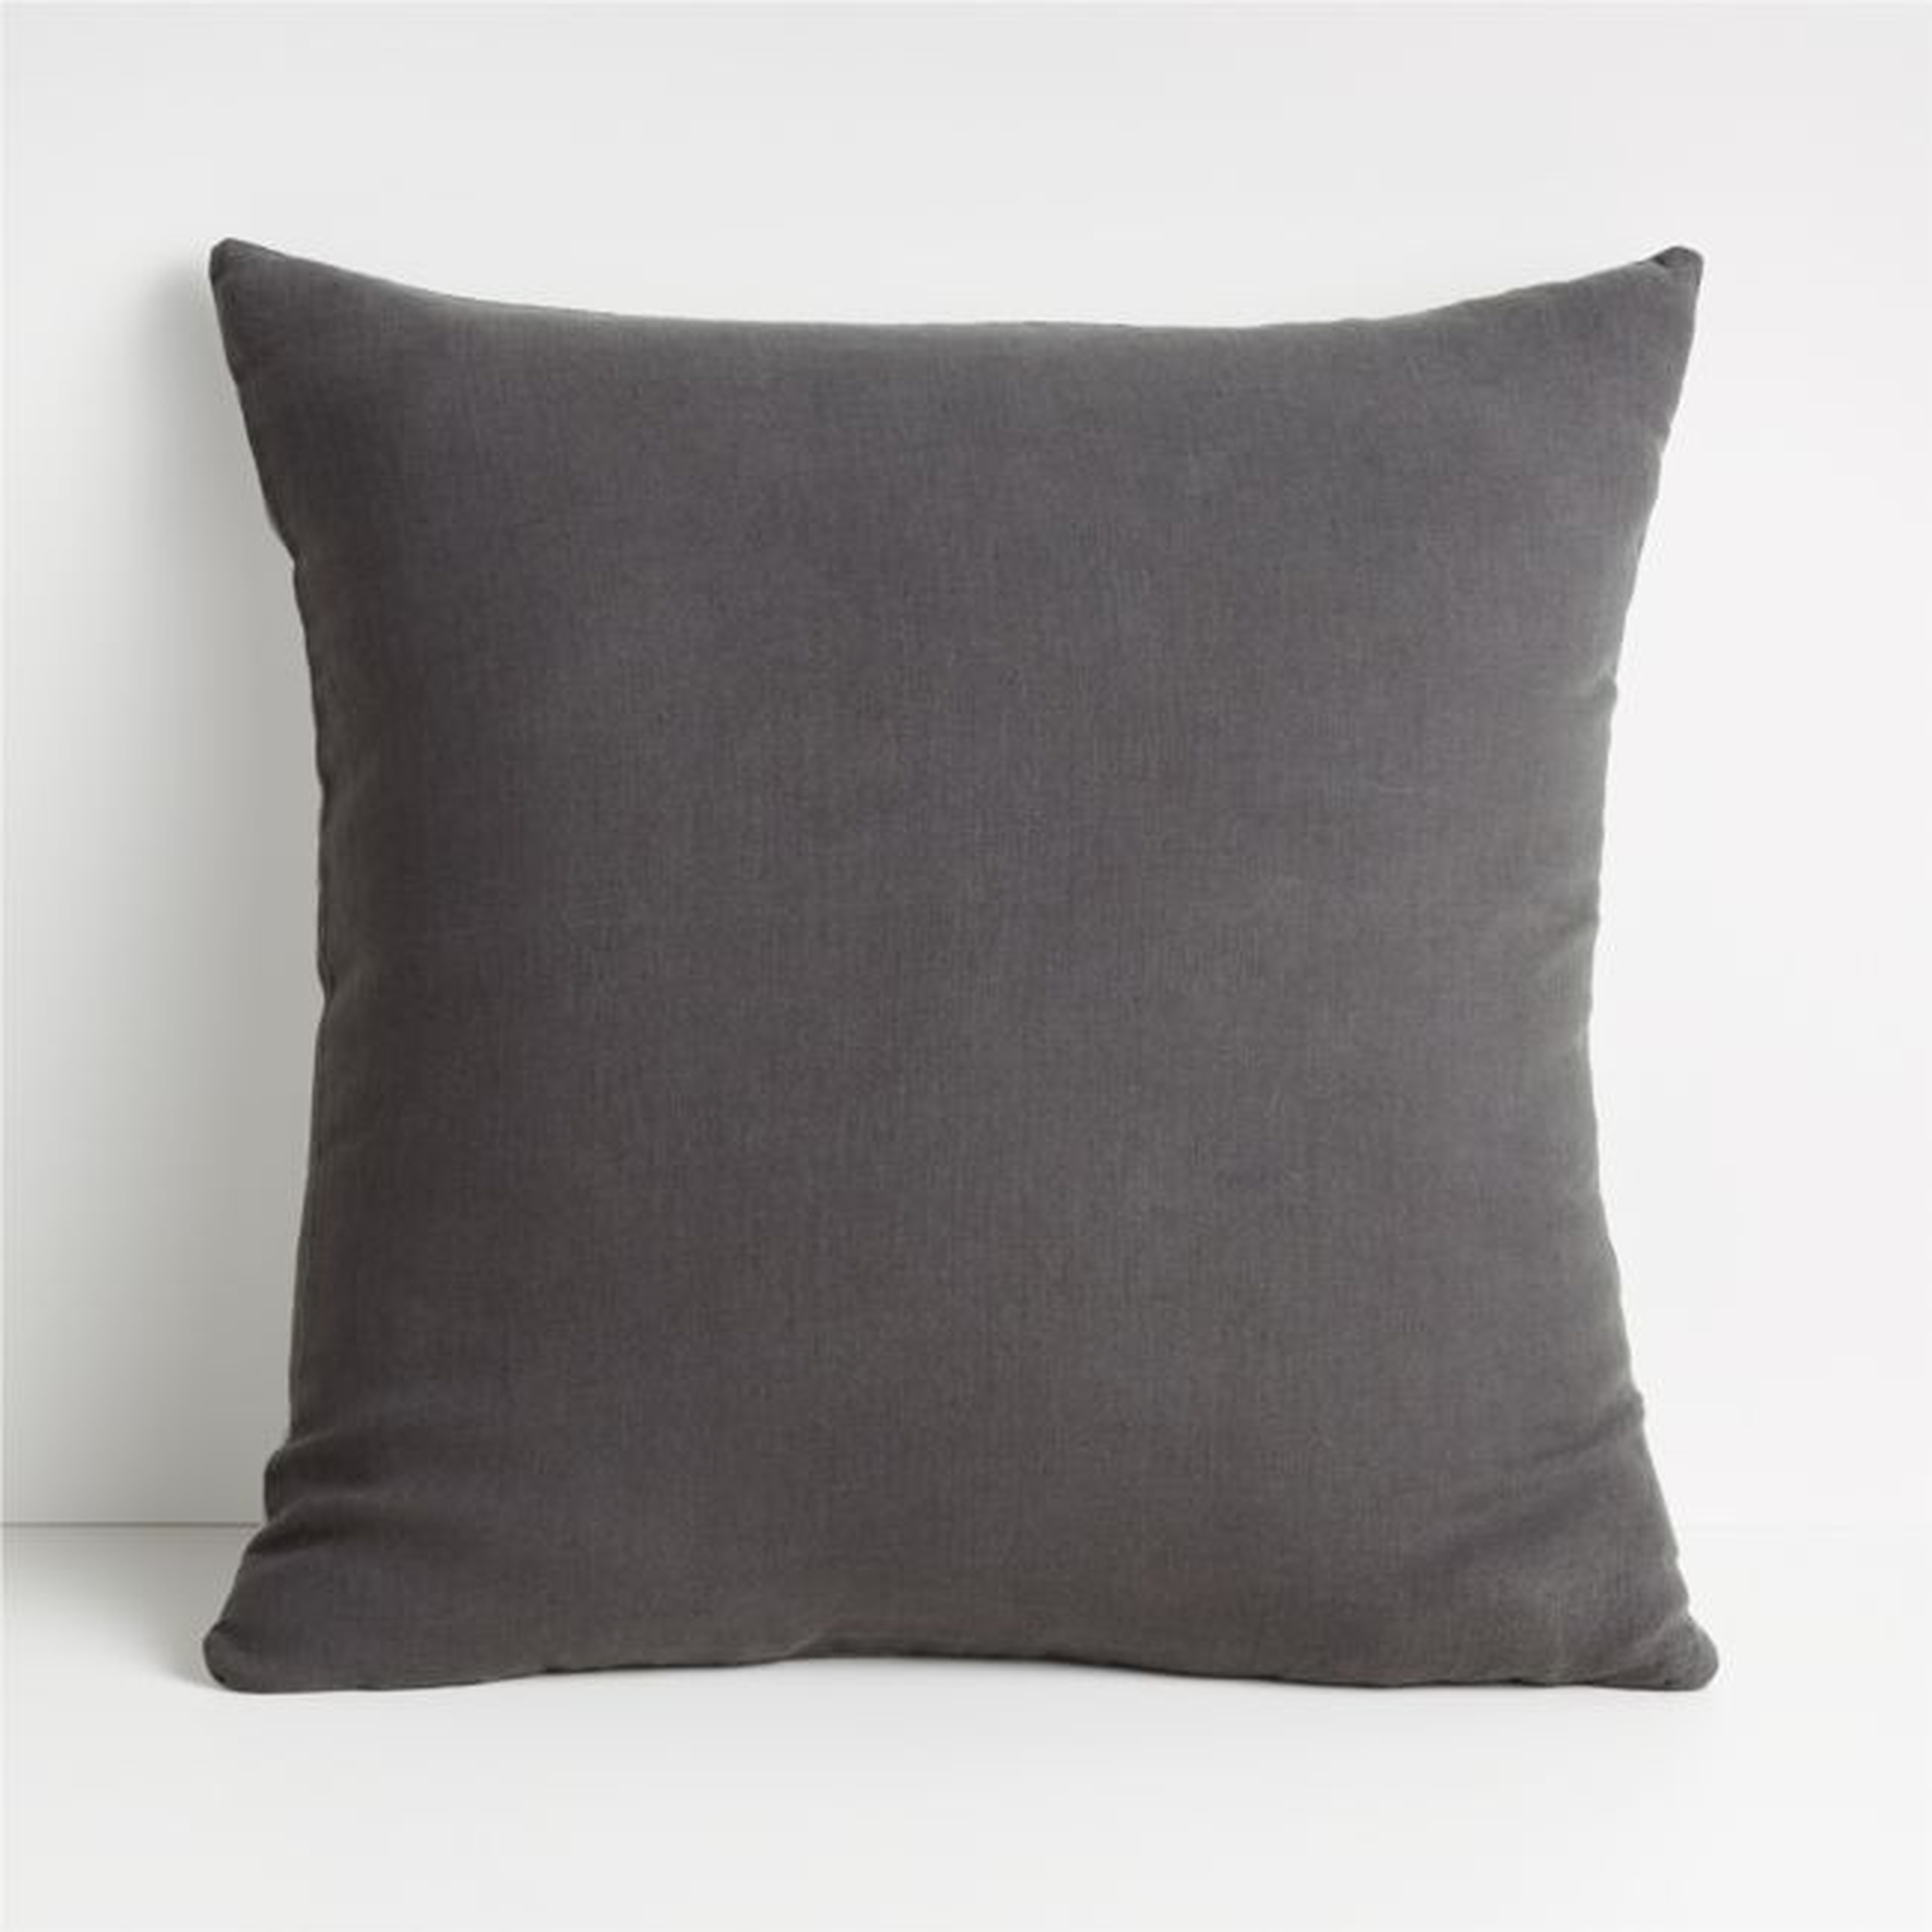 Linen Steel 20" Pillow with Feather-Down Insert - Crate and Barrel